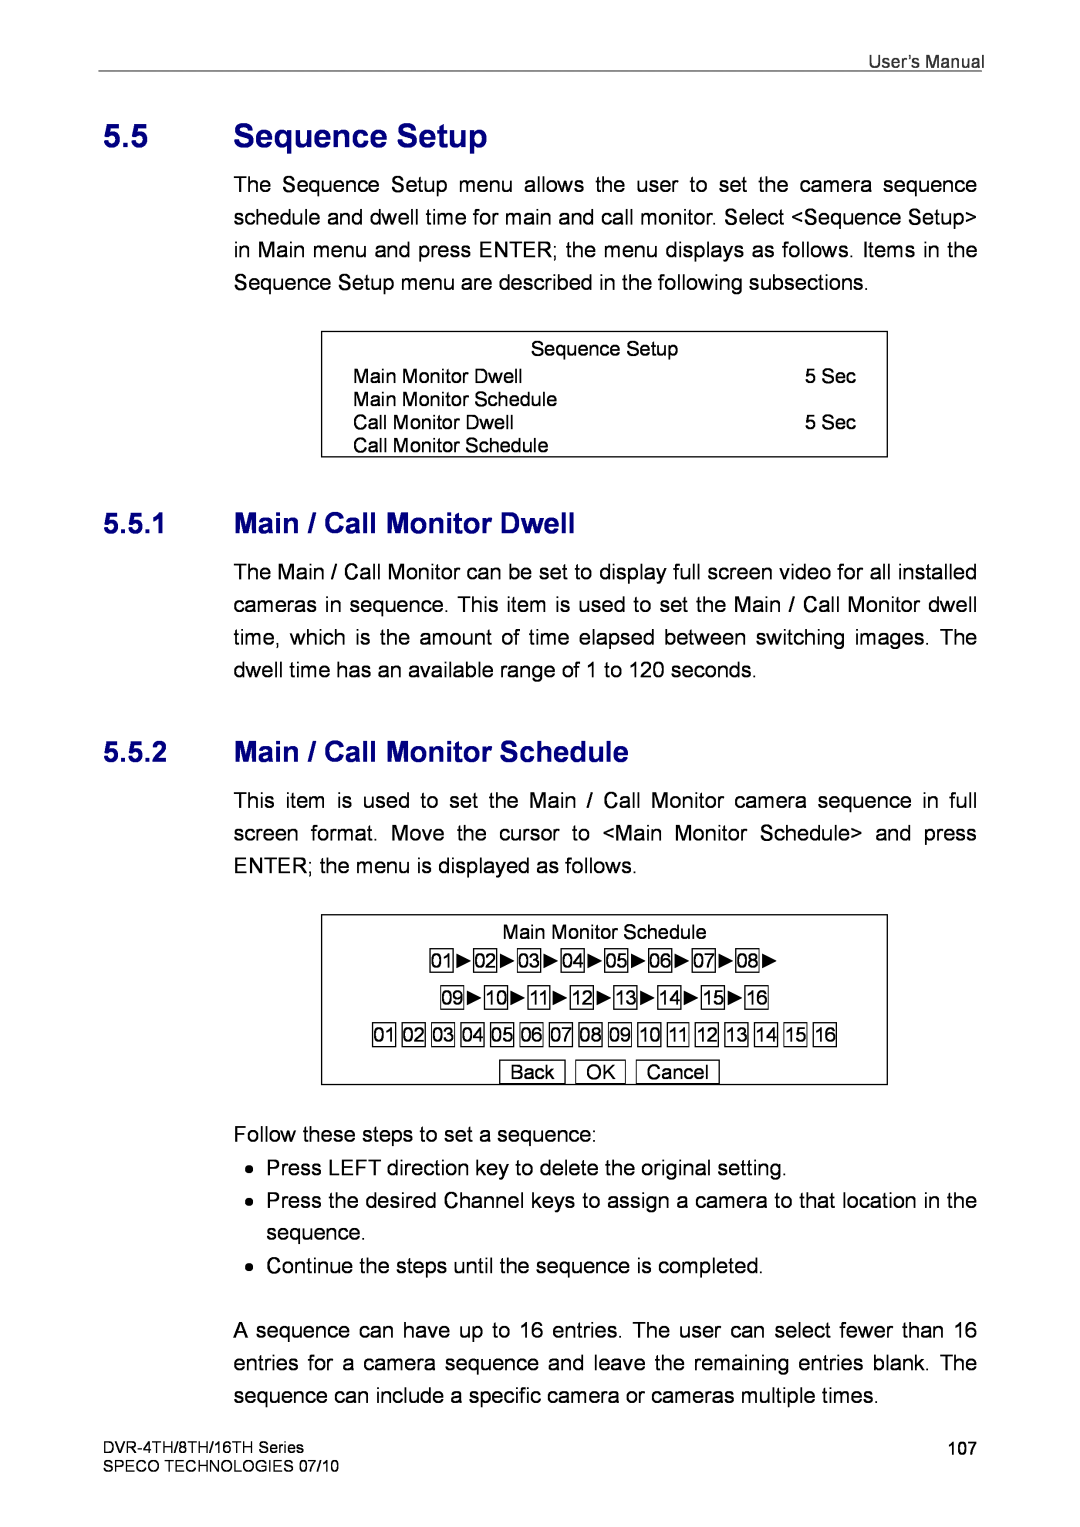 Speco Technologies 8TH, 4TH, 16TH user manual Sequence Setup, Main / Call Monitor Dwell, Main / Call Monitor Schedule 